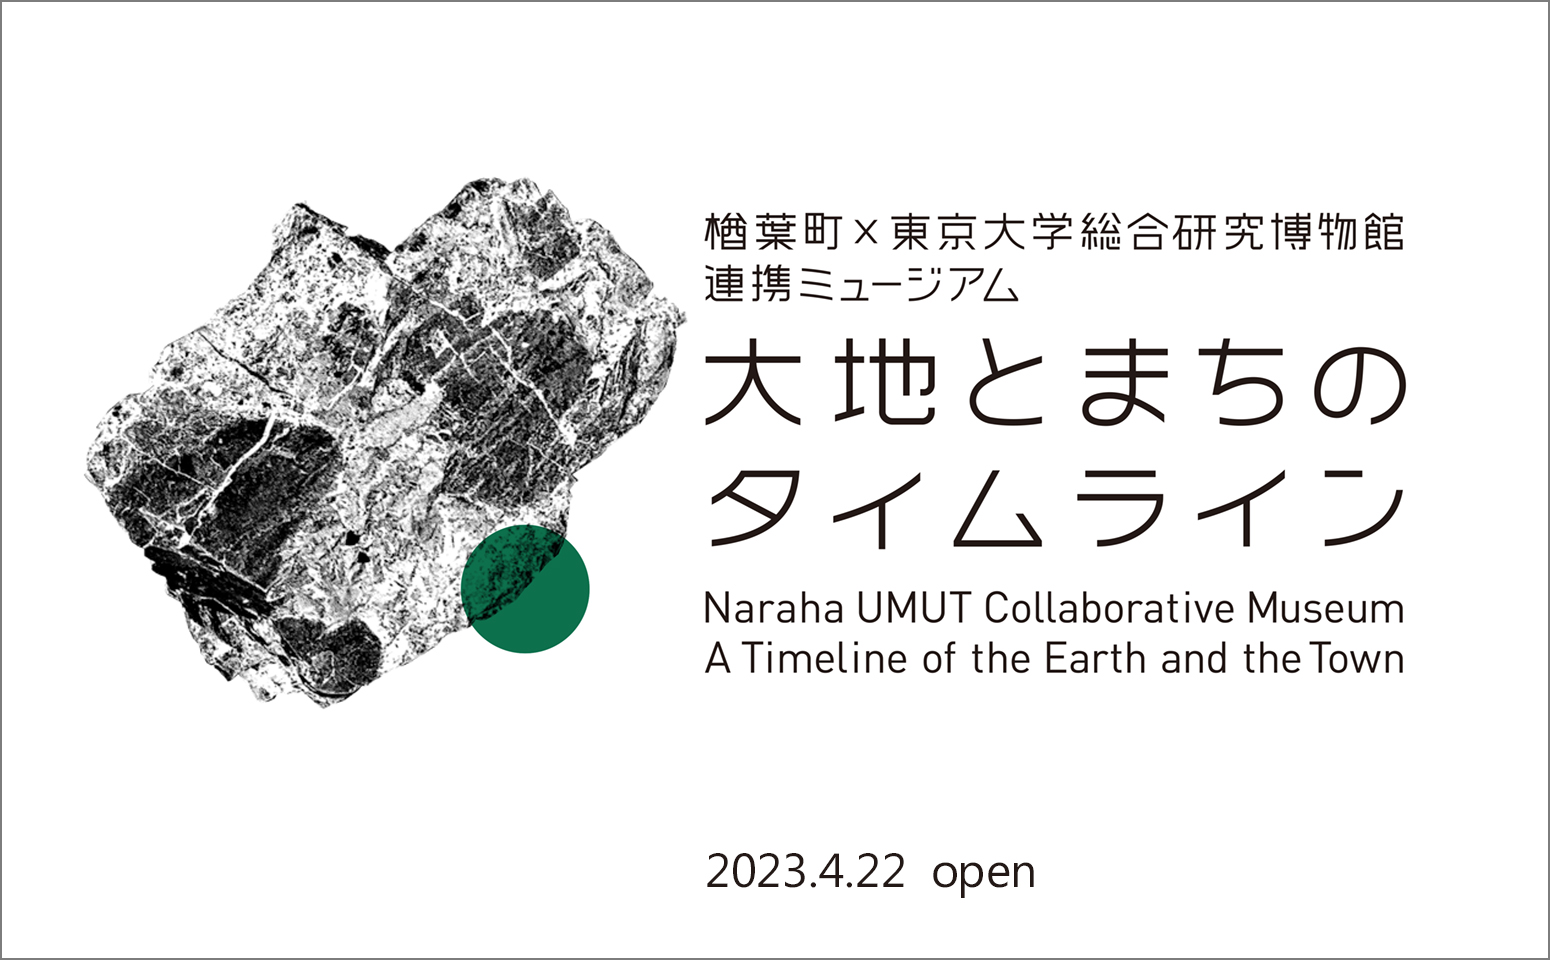 Naraha UMUT Collaborative Museum : A Timeline of the Earth and the Town